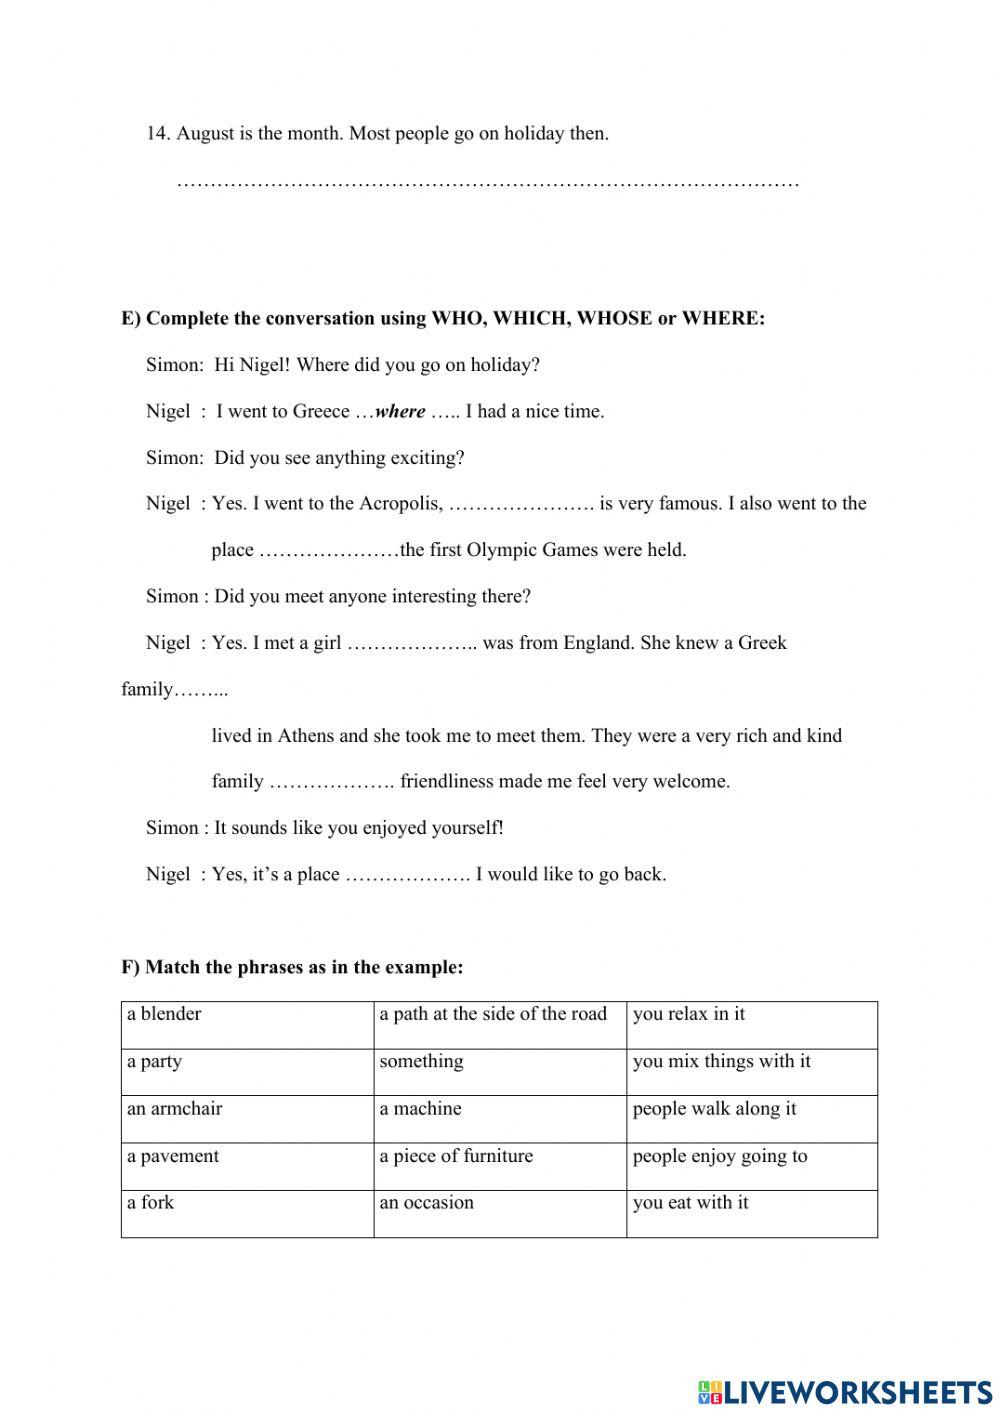 Relative Clause - WS 36